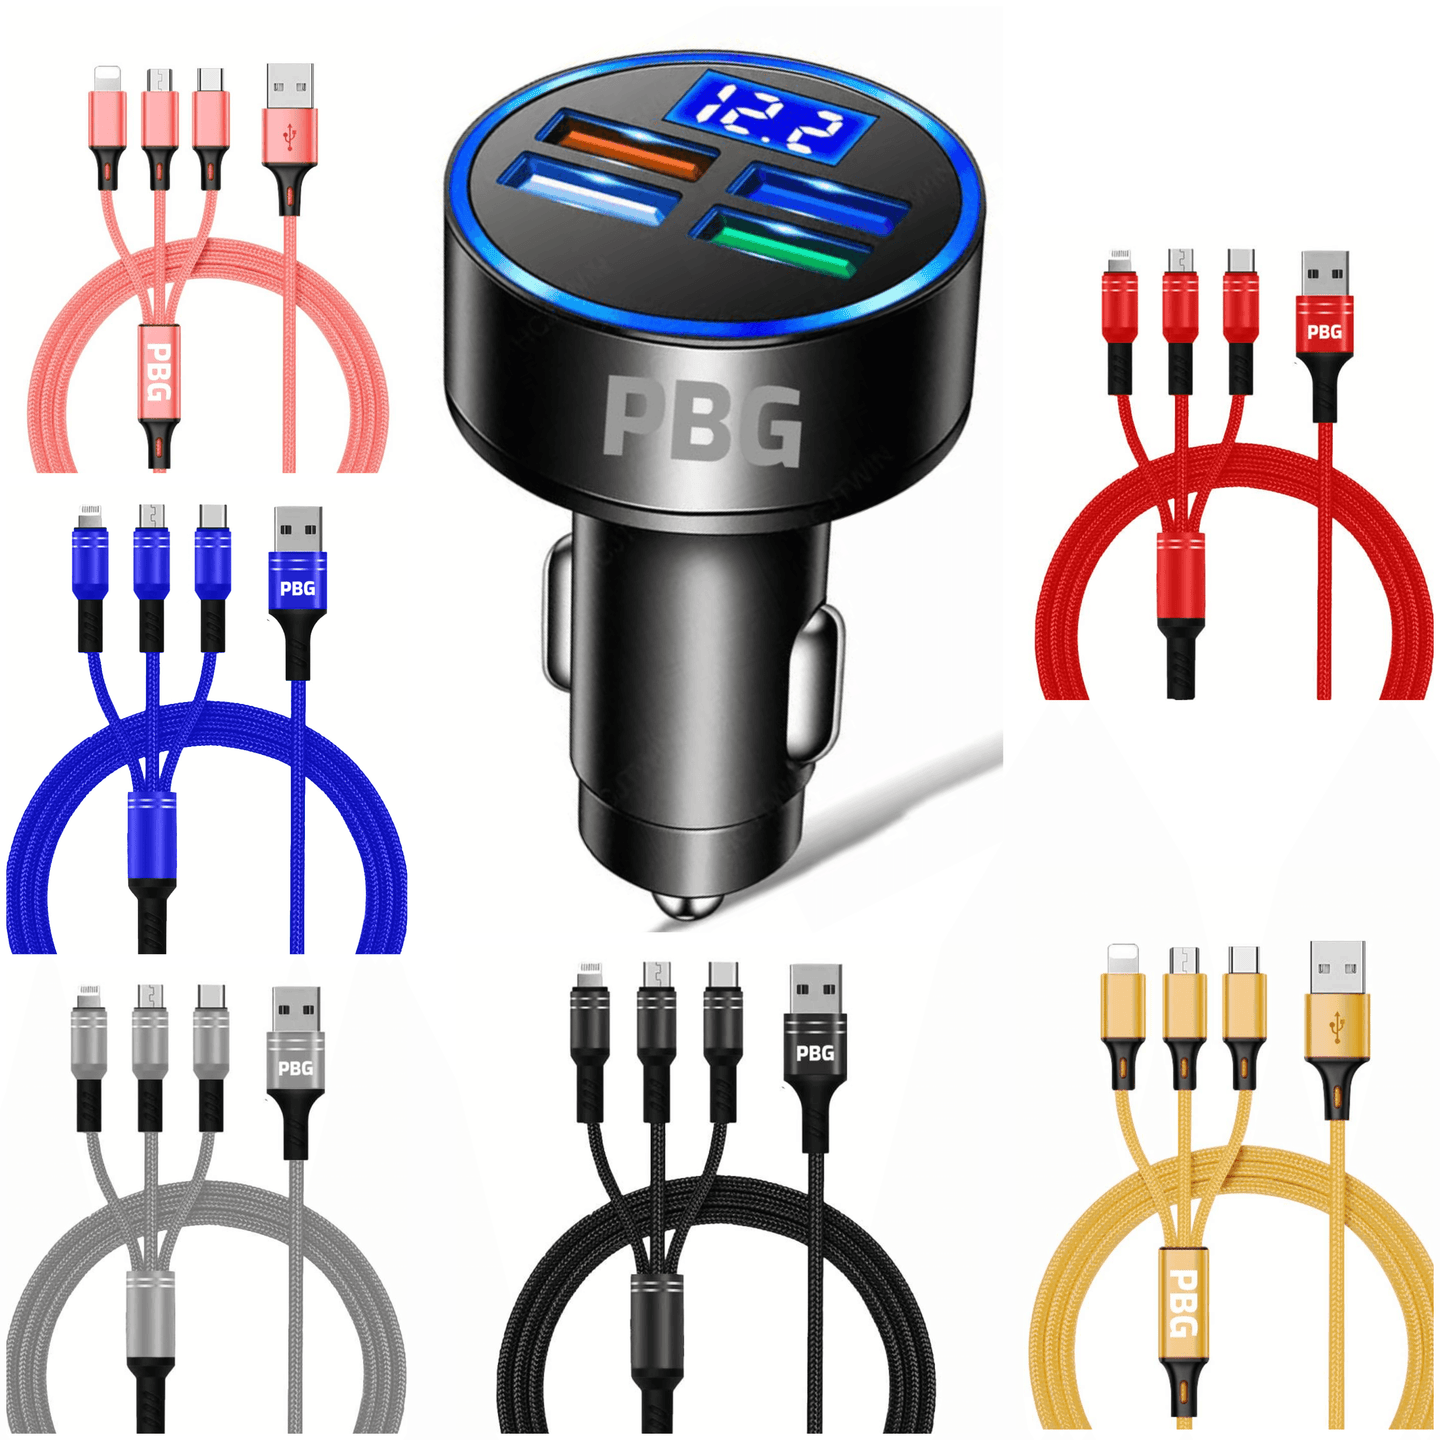 PBG LED 4 Port Car Charger Voltage Display and 3 in 1 Cable Bundle - PremiumBrandGoods